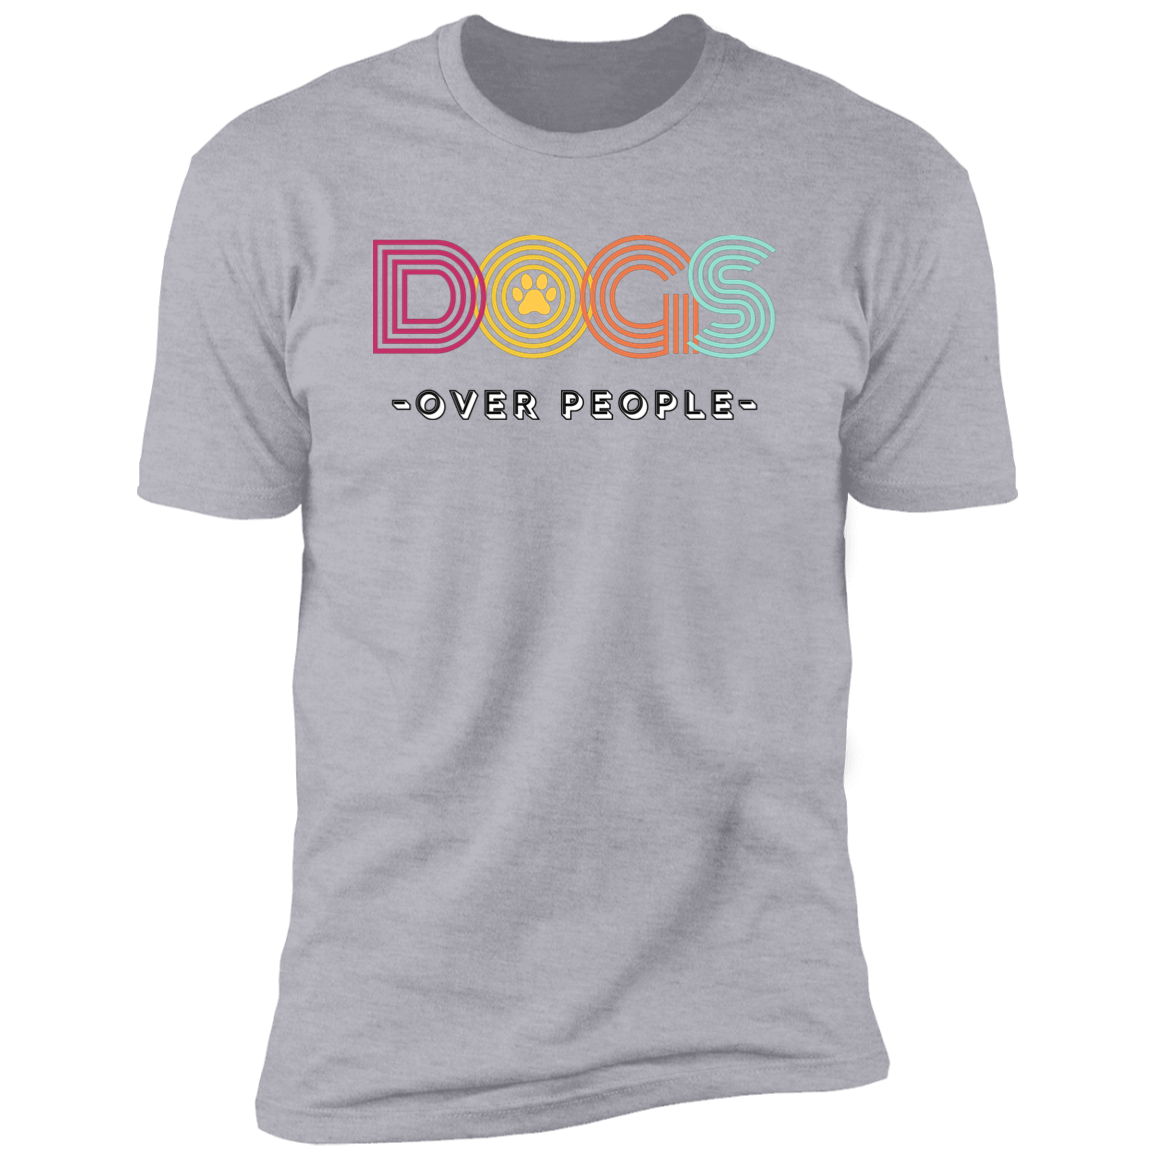 Dogs Over People t-shirt, funny dog shirt for humans, in light heather gray